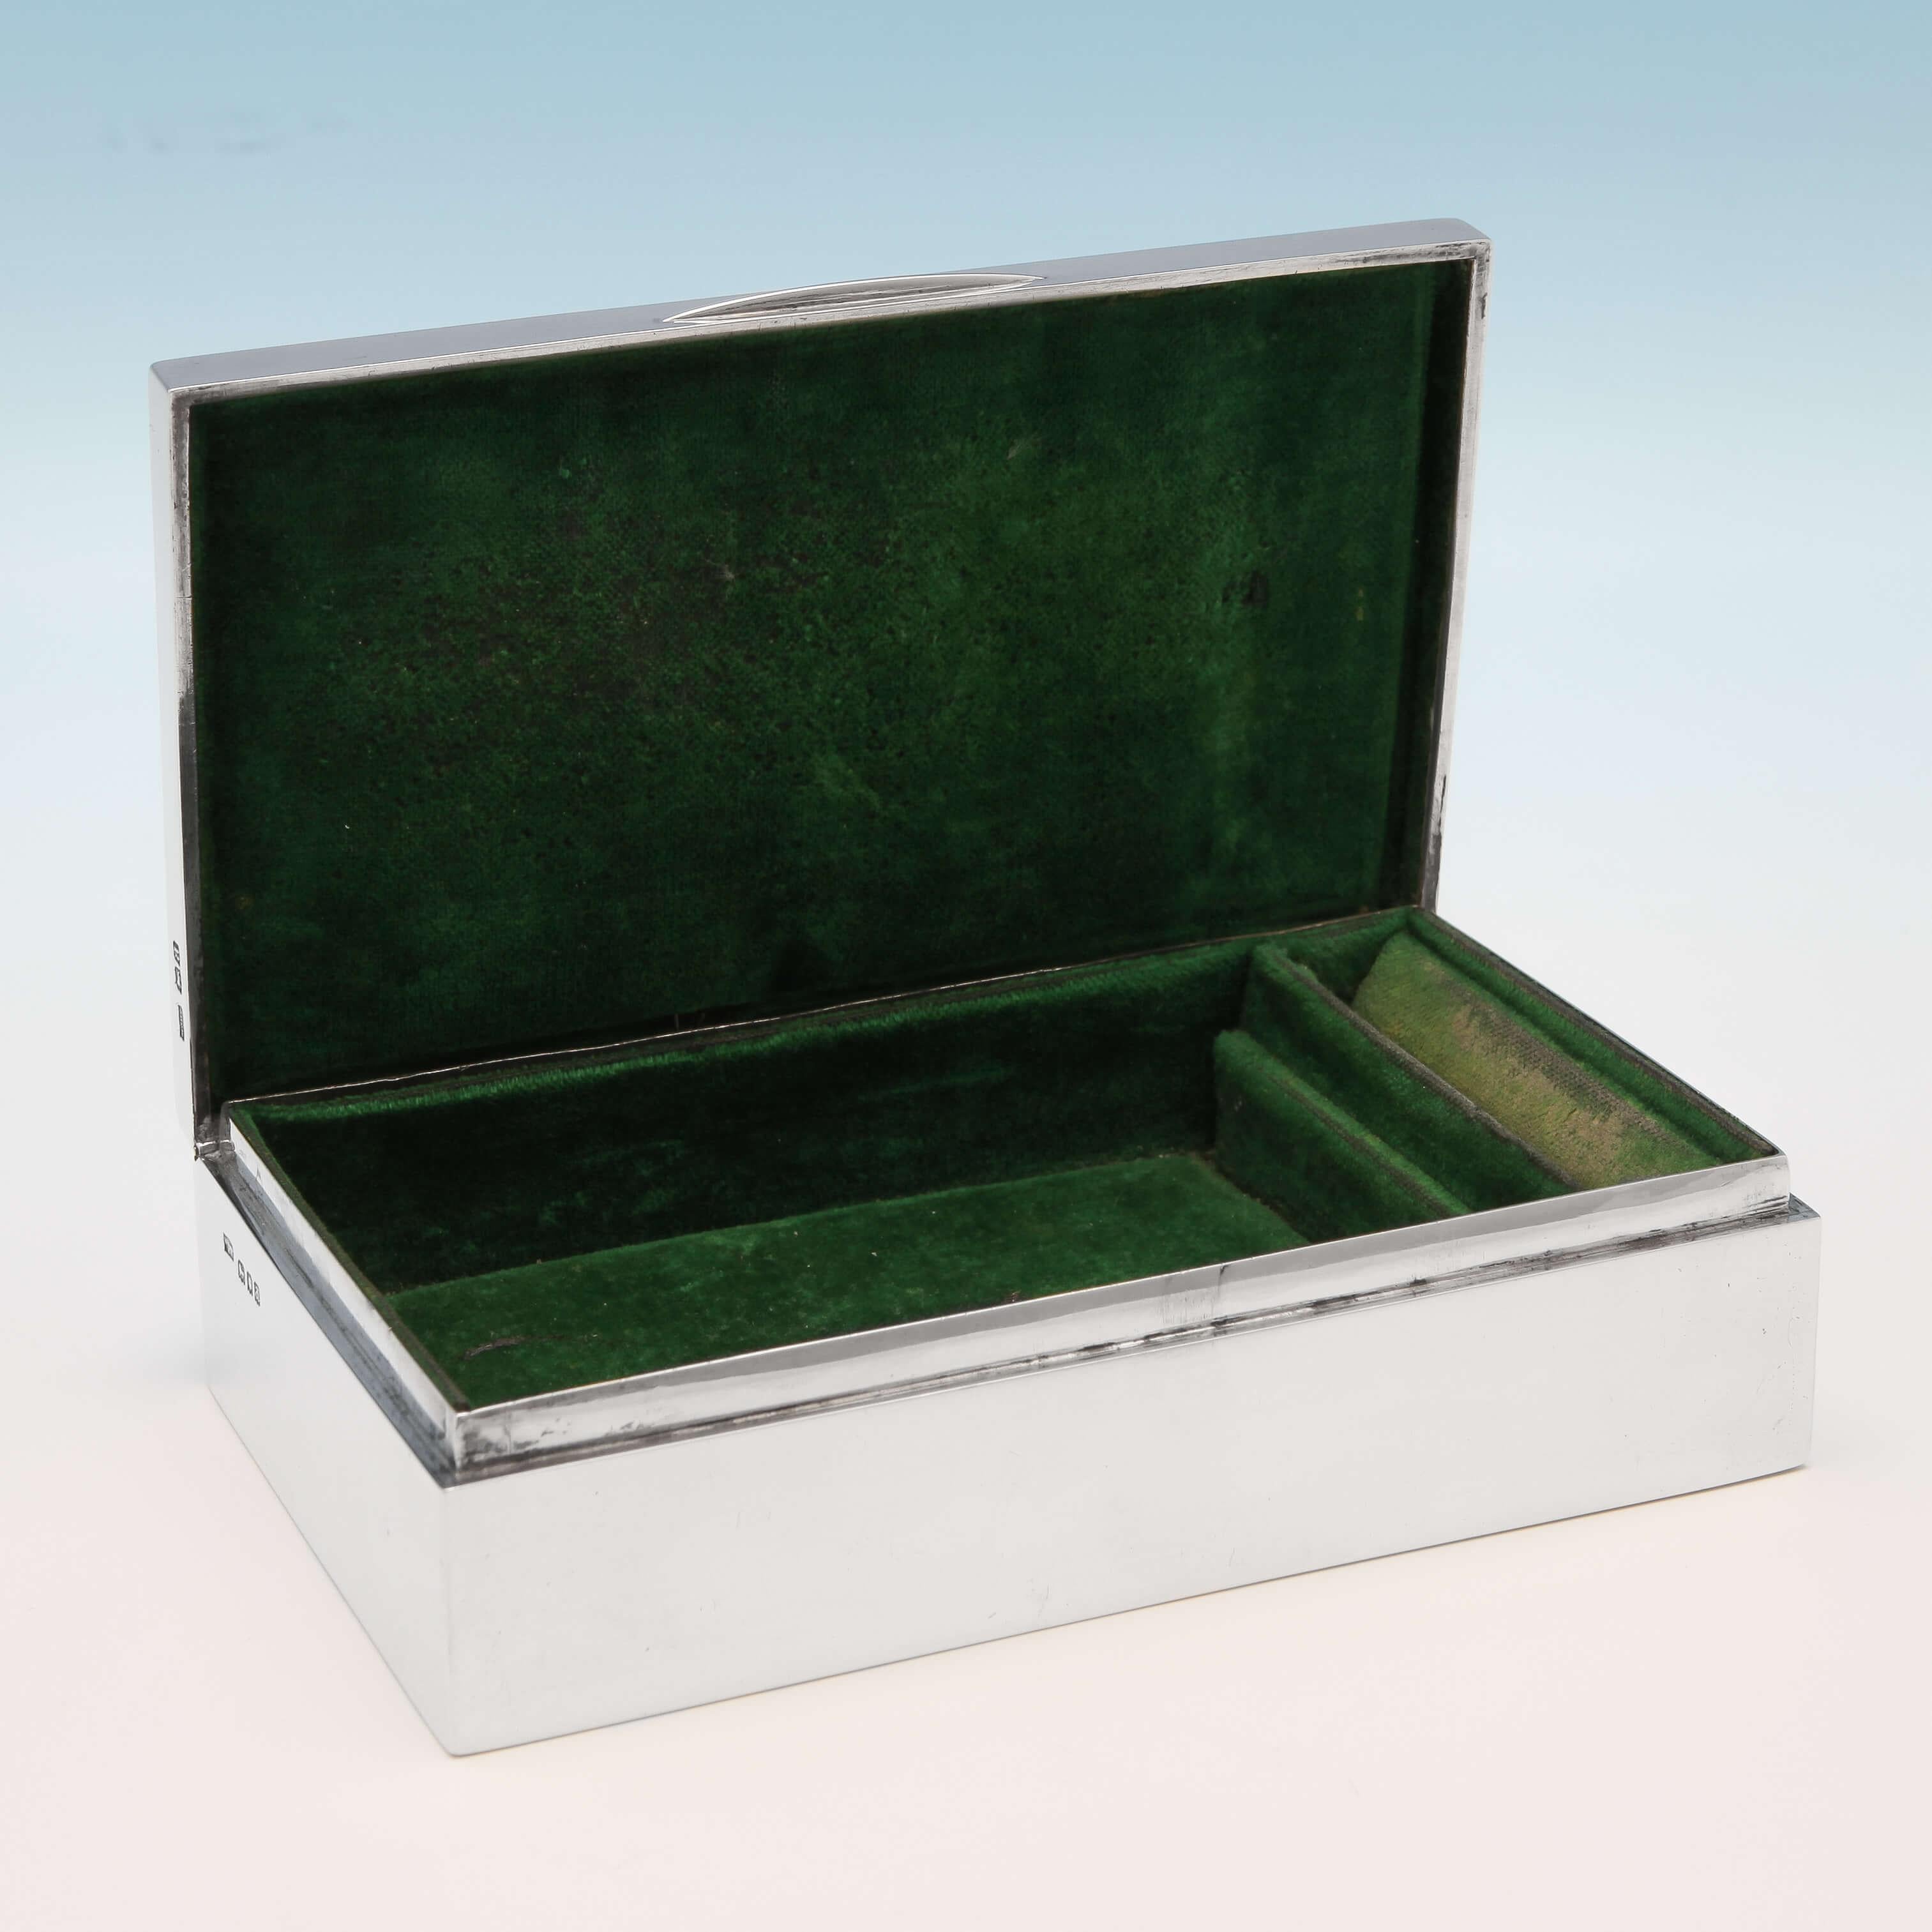 Hallmarked in London in 1916 by Mappin & Webb, this attractive, George V, sterling silver jewellery box, has a green velvet lining, with a slot for rings. The lid has been engraved with floral swag and scroll decoration and has a bird in flight at